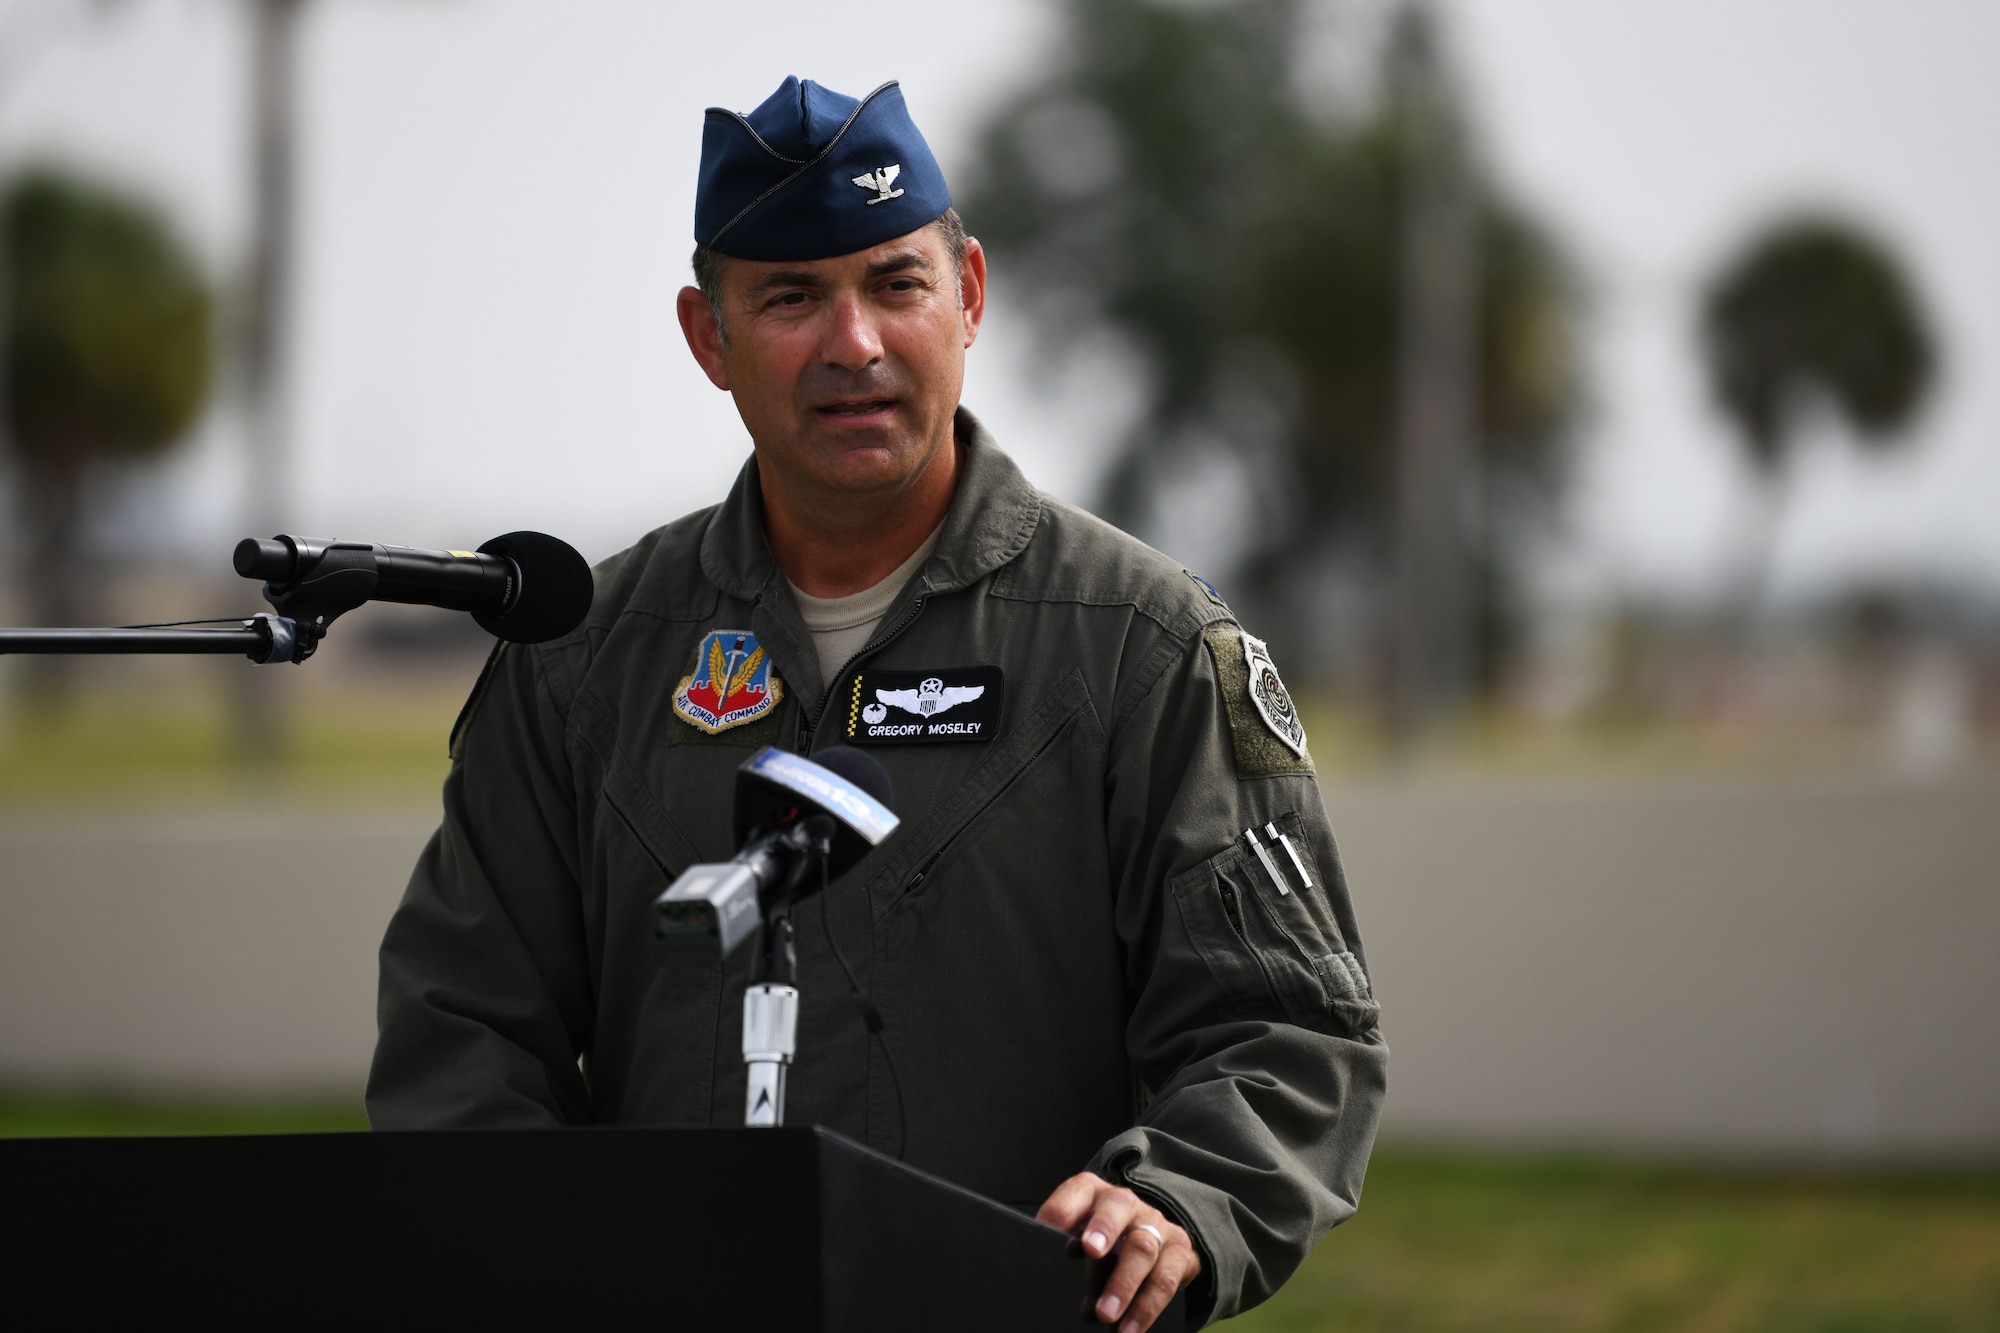 U.S. Air Force Col. Greg Moseley, 325th Fighter Wing commander, speaks during a change of command ceremony at Tyndall Air Force Base, Florida, June 26, 2020. As the 325th FW commander, Moseley will oversee F-22 Raptor pilot training as well as the continued rebuild of the base following the damage done by Hurricane Michael in 2018. (U.S. Air Force photo by Tech. Sgt. Clayton Lenhardt)